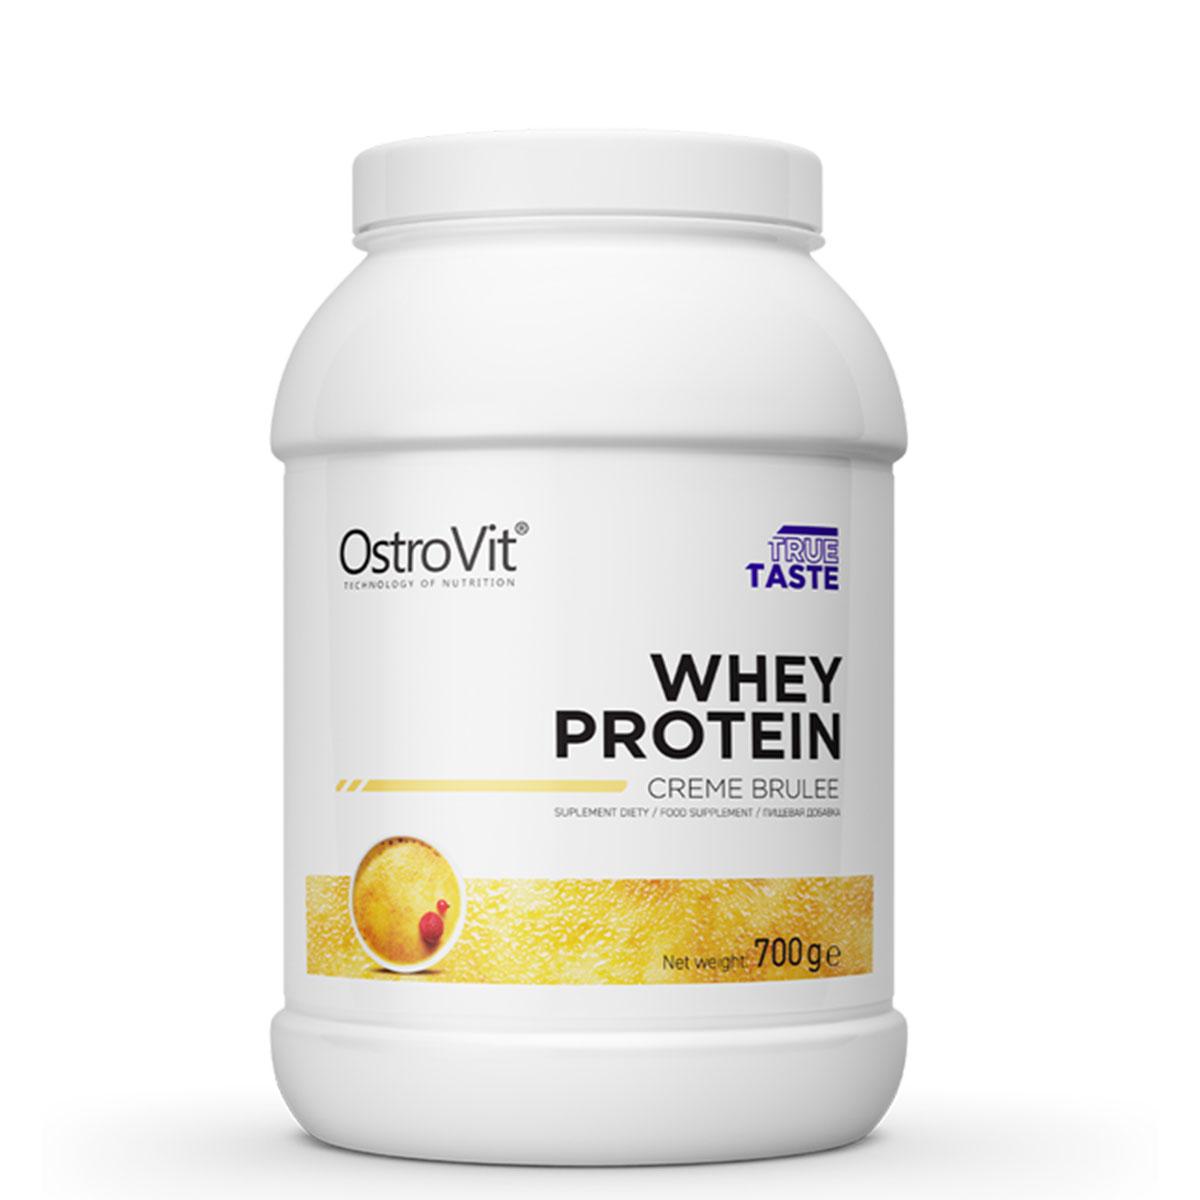 Selected image for OSTRO VIT Whey protein Cream brule 700g